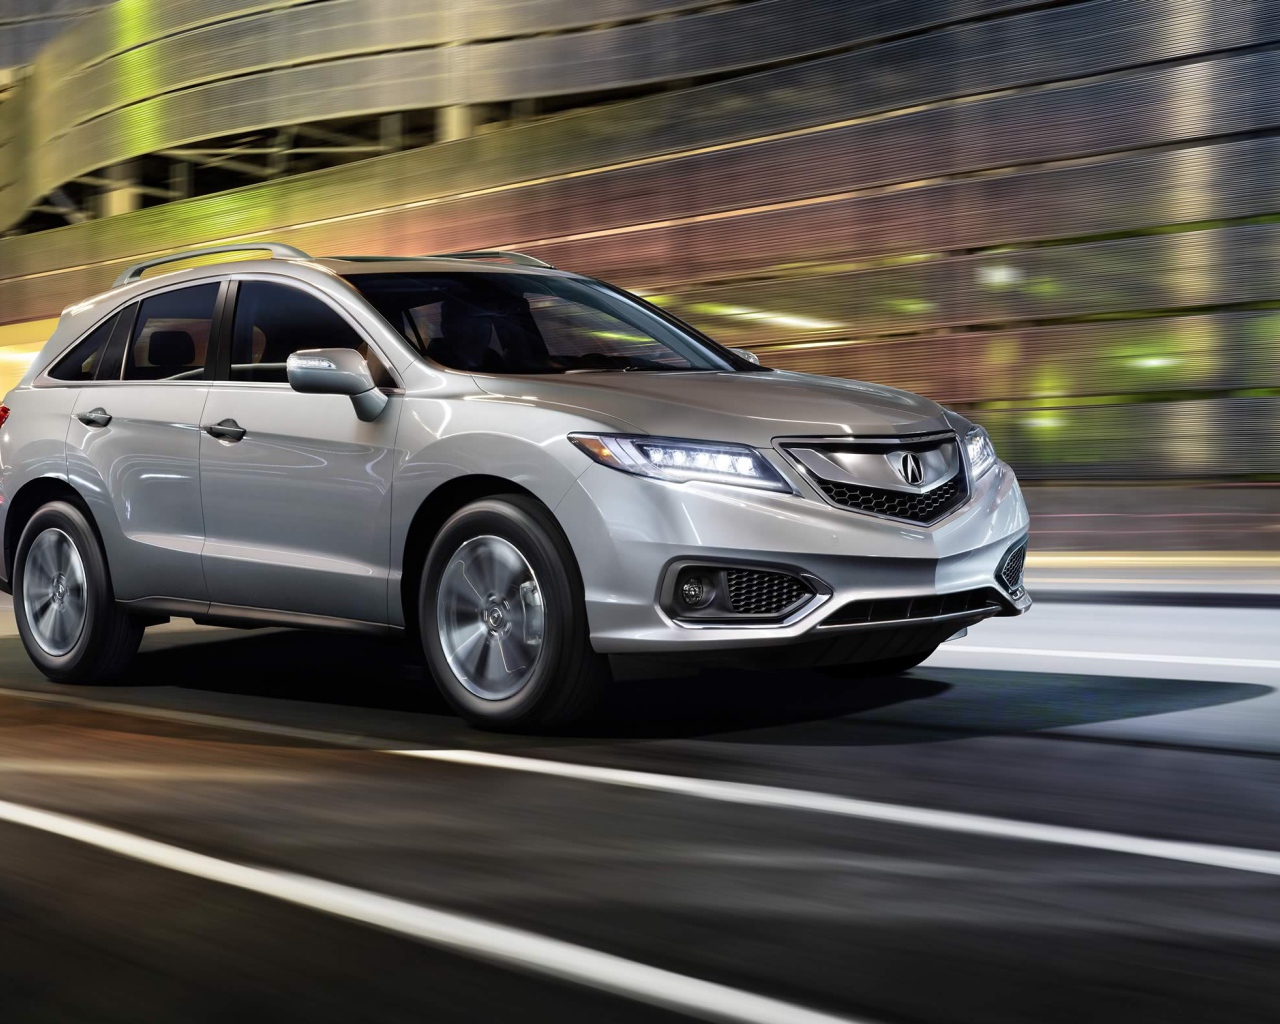 Silver SUV Acura RDX, 2018 at speed